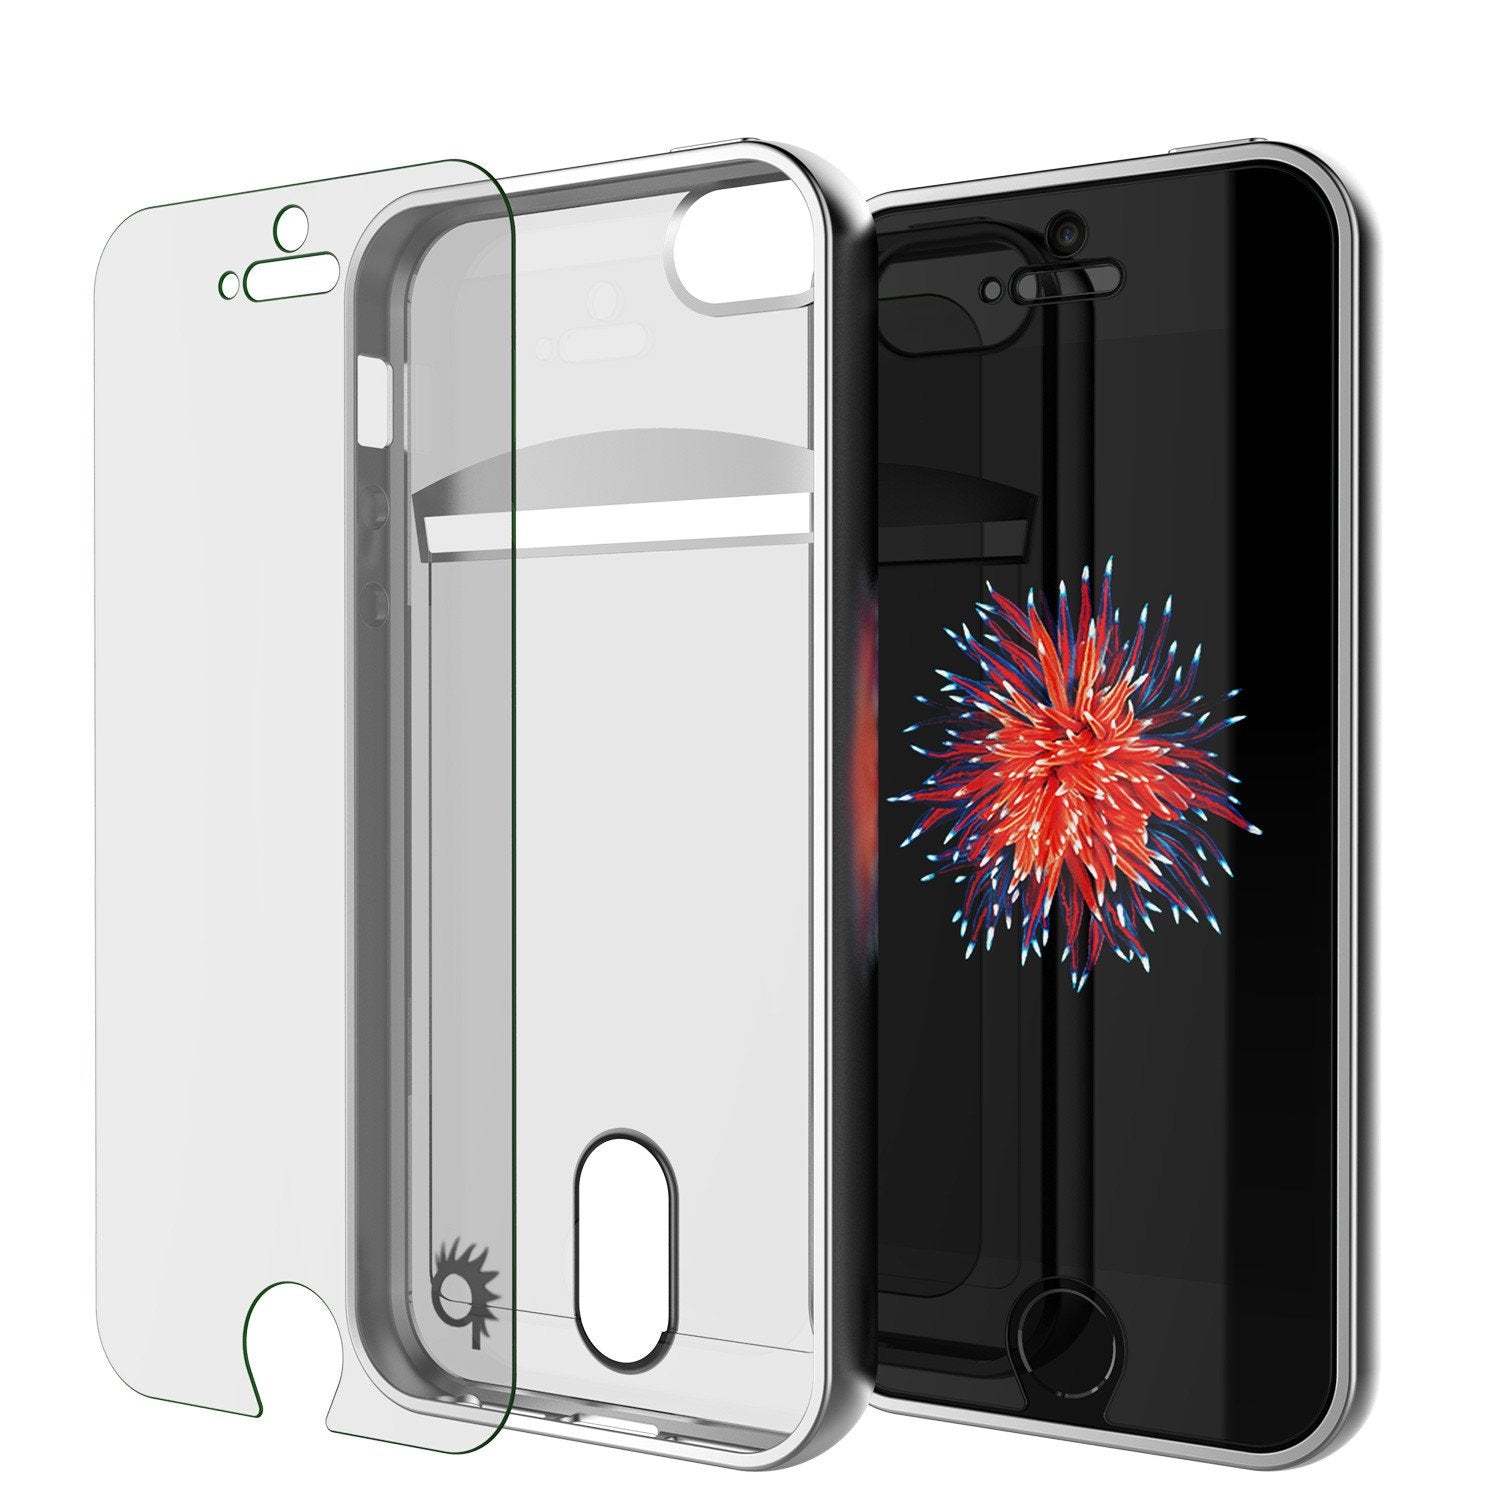 iPhone SE/5S/5 Case, PUNKCASE® LUCID Silver Series | Card Slot | SHIELD Screen Protector | Ultra fit - PunkCase NZ